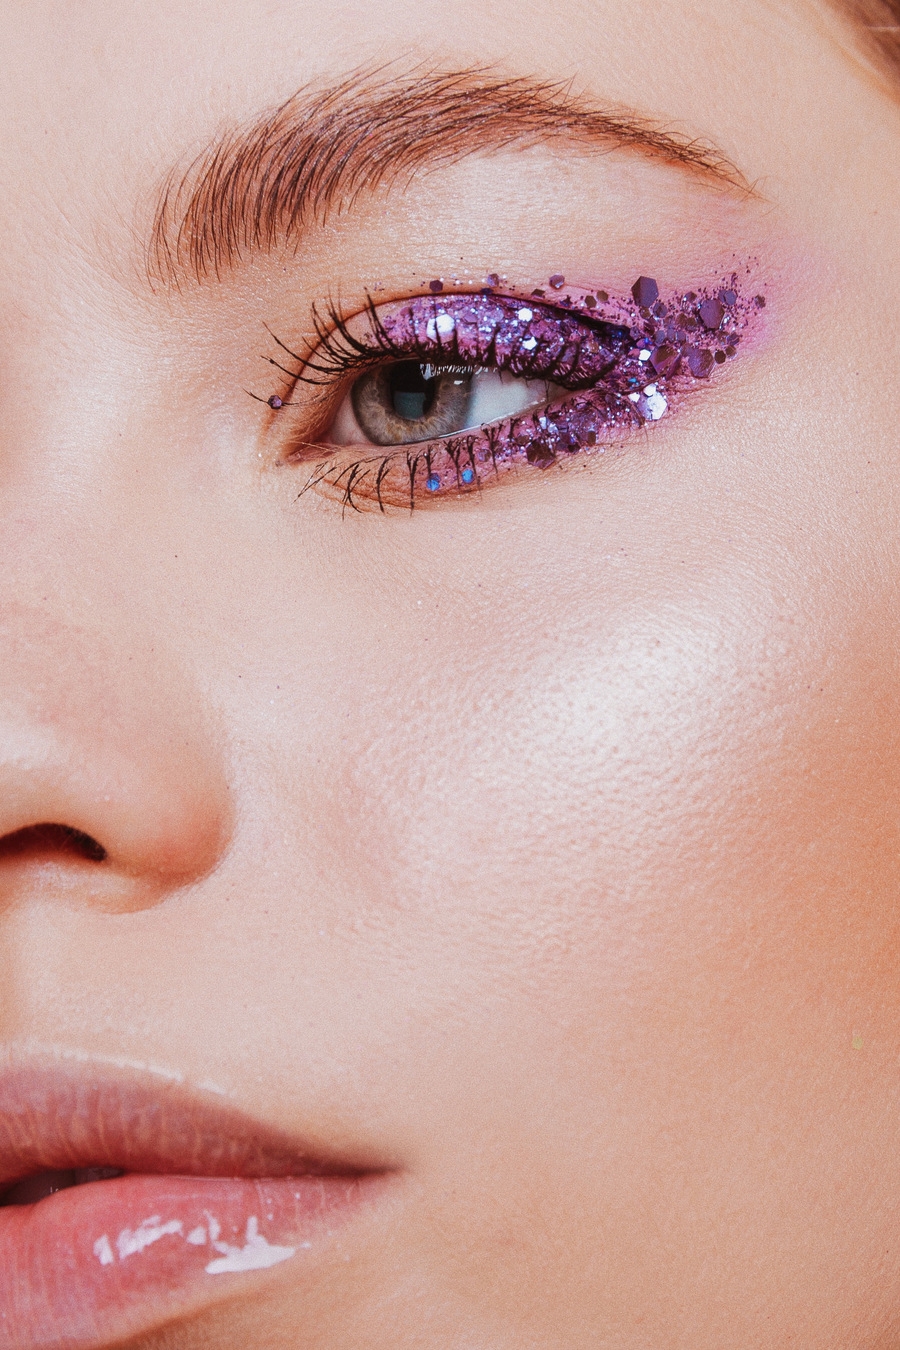 A woman with a purple shimmer eye shadow looking at the camera